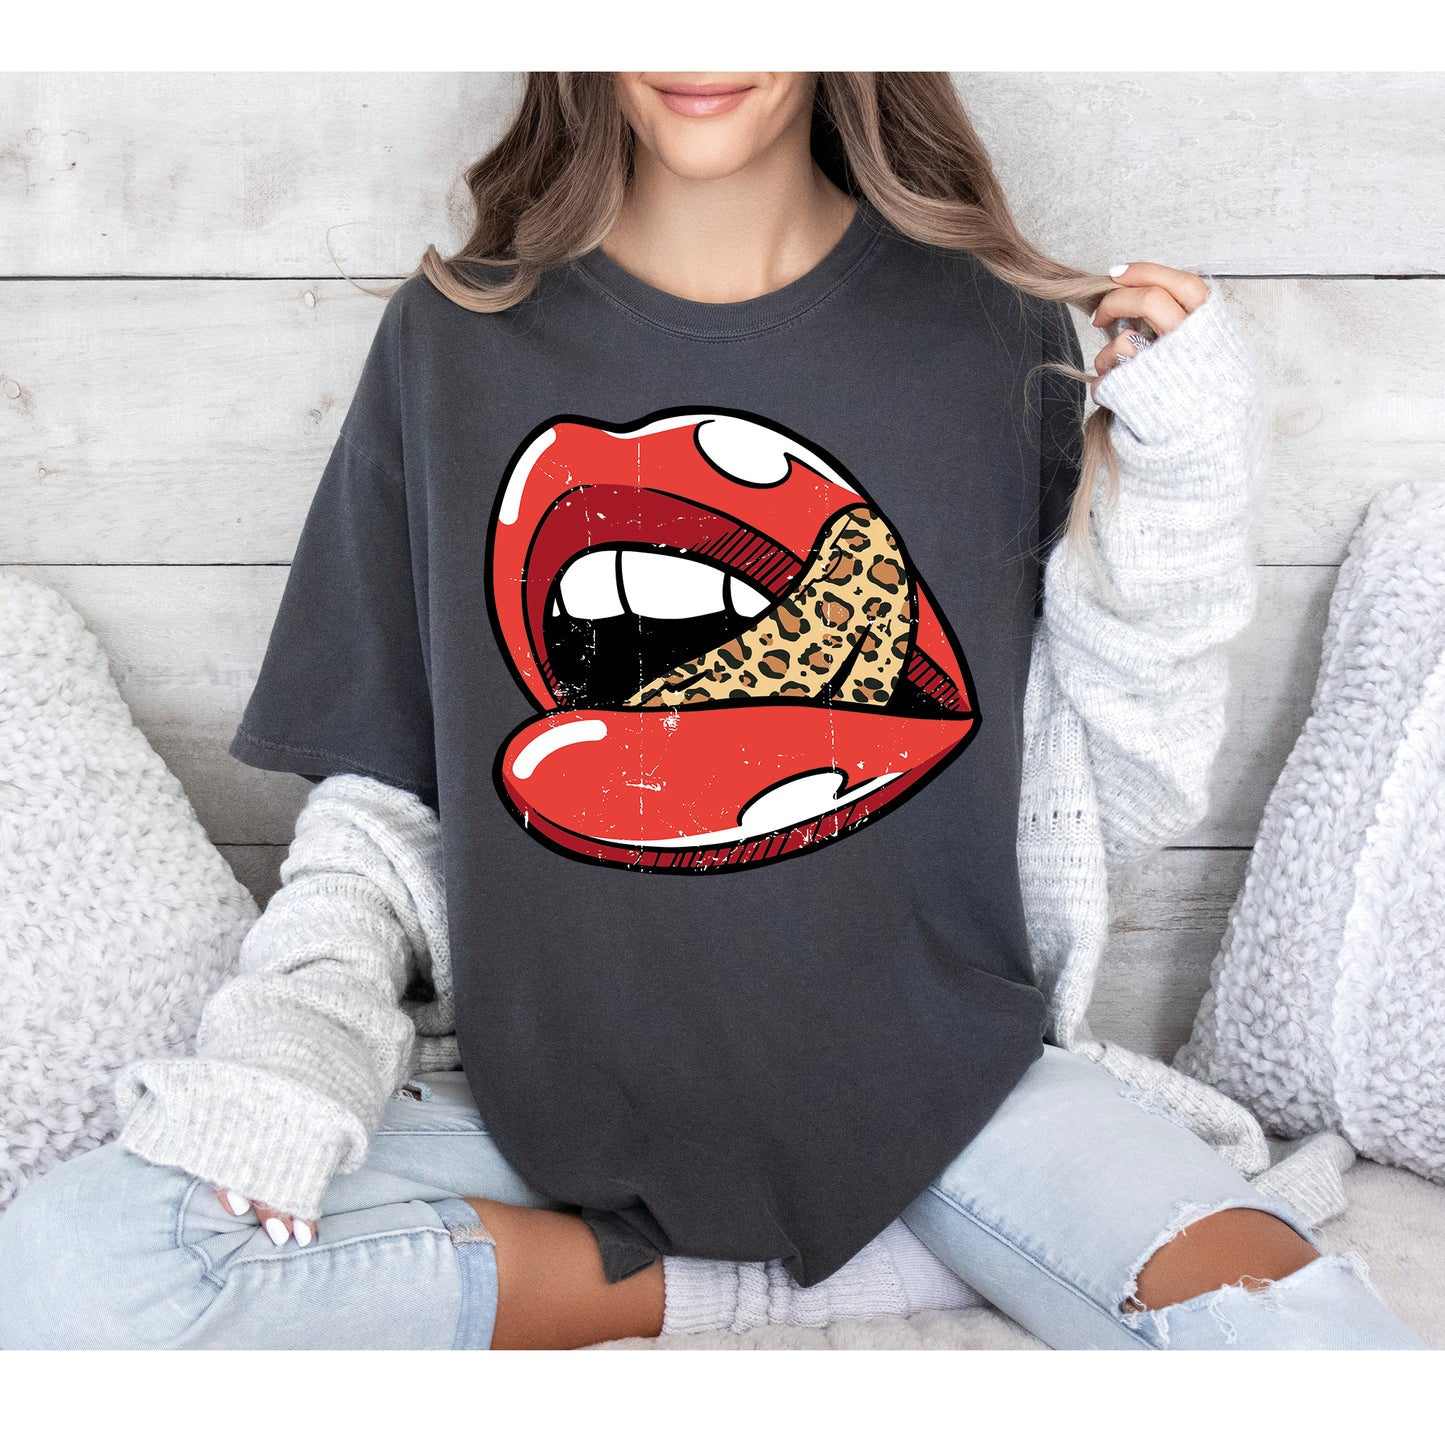 The Rolling Stones Graphic Tee, Vintage Rolling Stones Shirt, Comfort Colors Tee-newamarketing